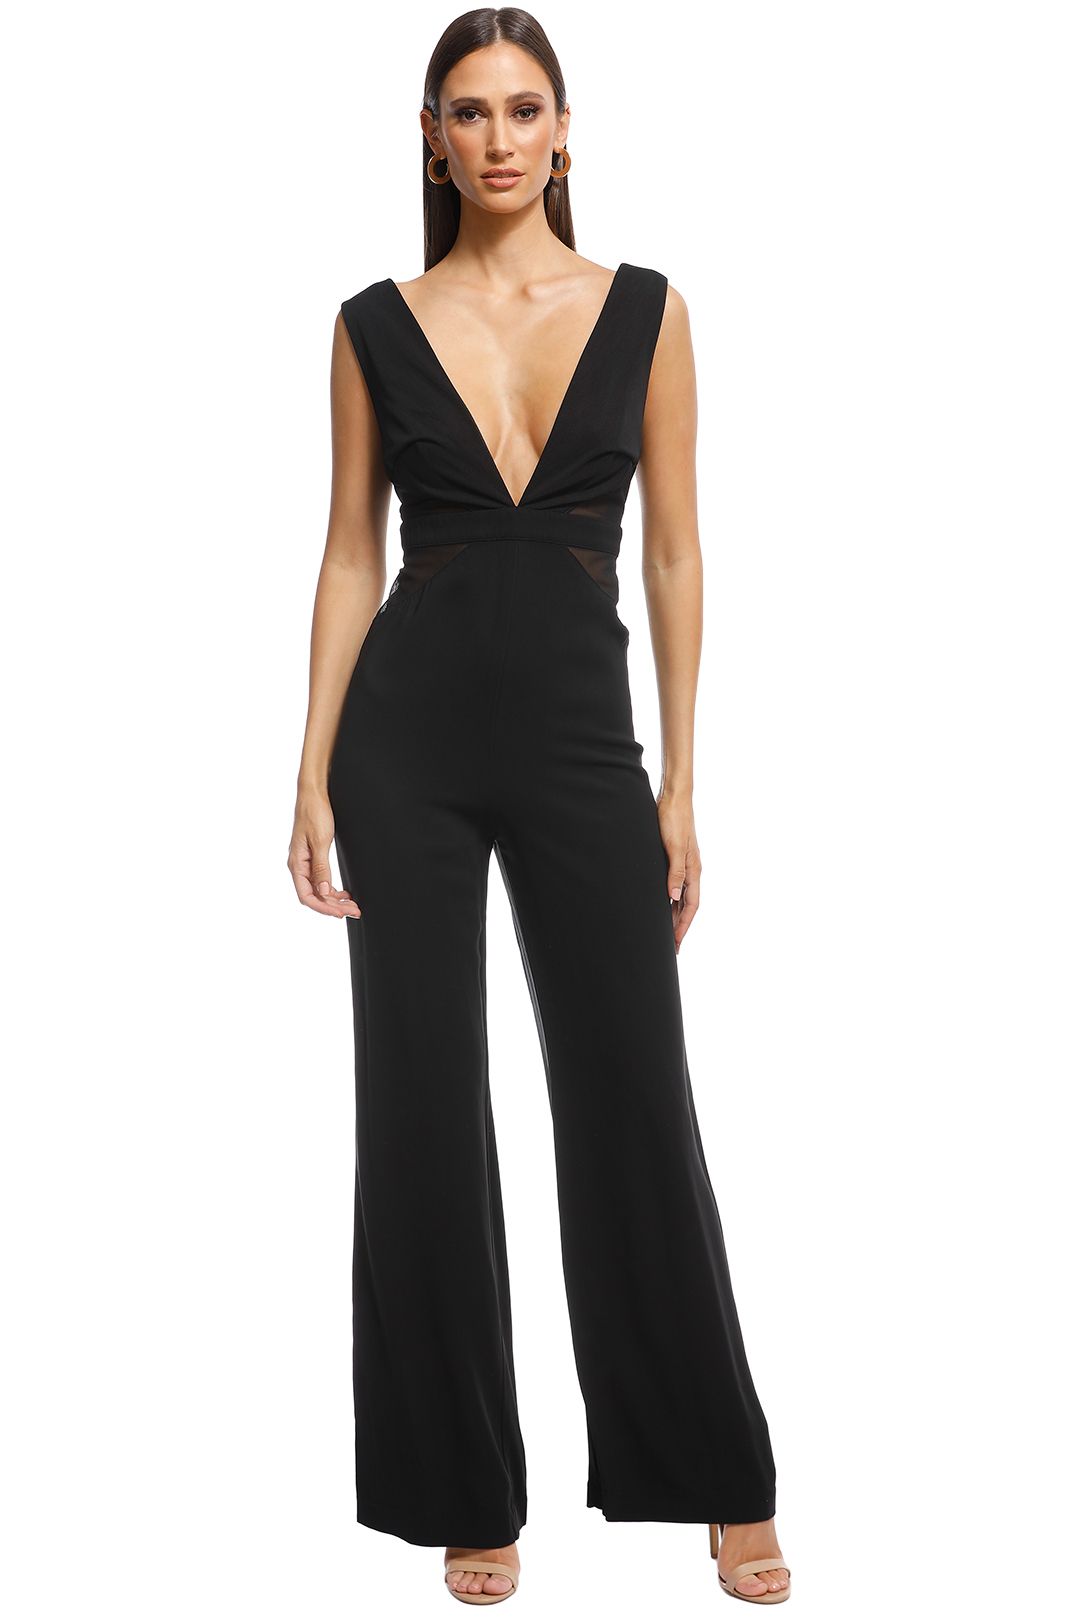 Talulah - Staccato Contrast Jumpsuit - Black - FRont